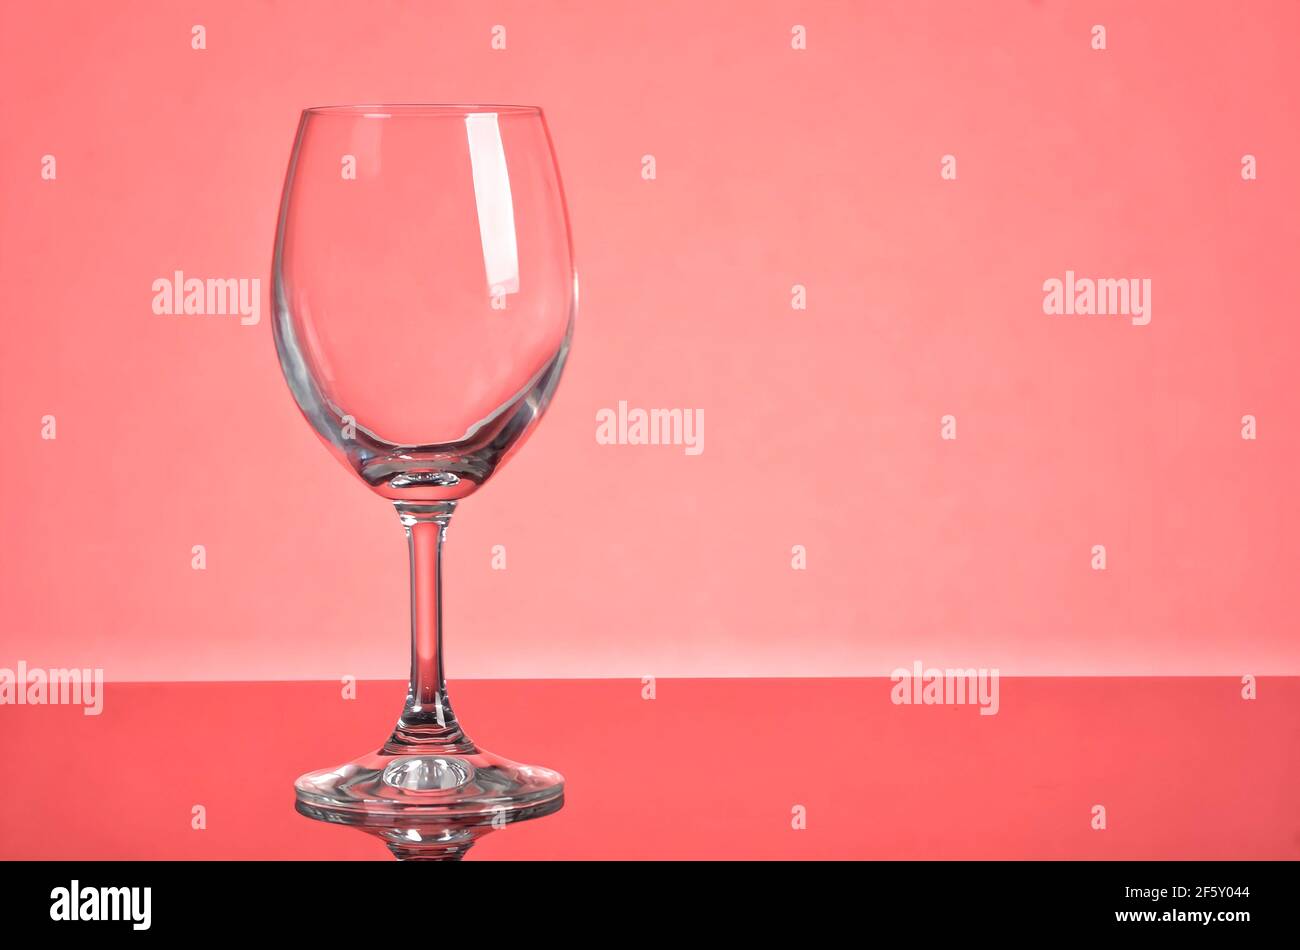 Empty wine glass laying with focus on the stem of the glass. Selective focus points. Blurred background Stock Photo